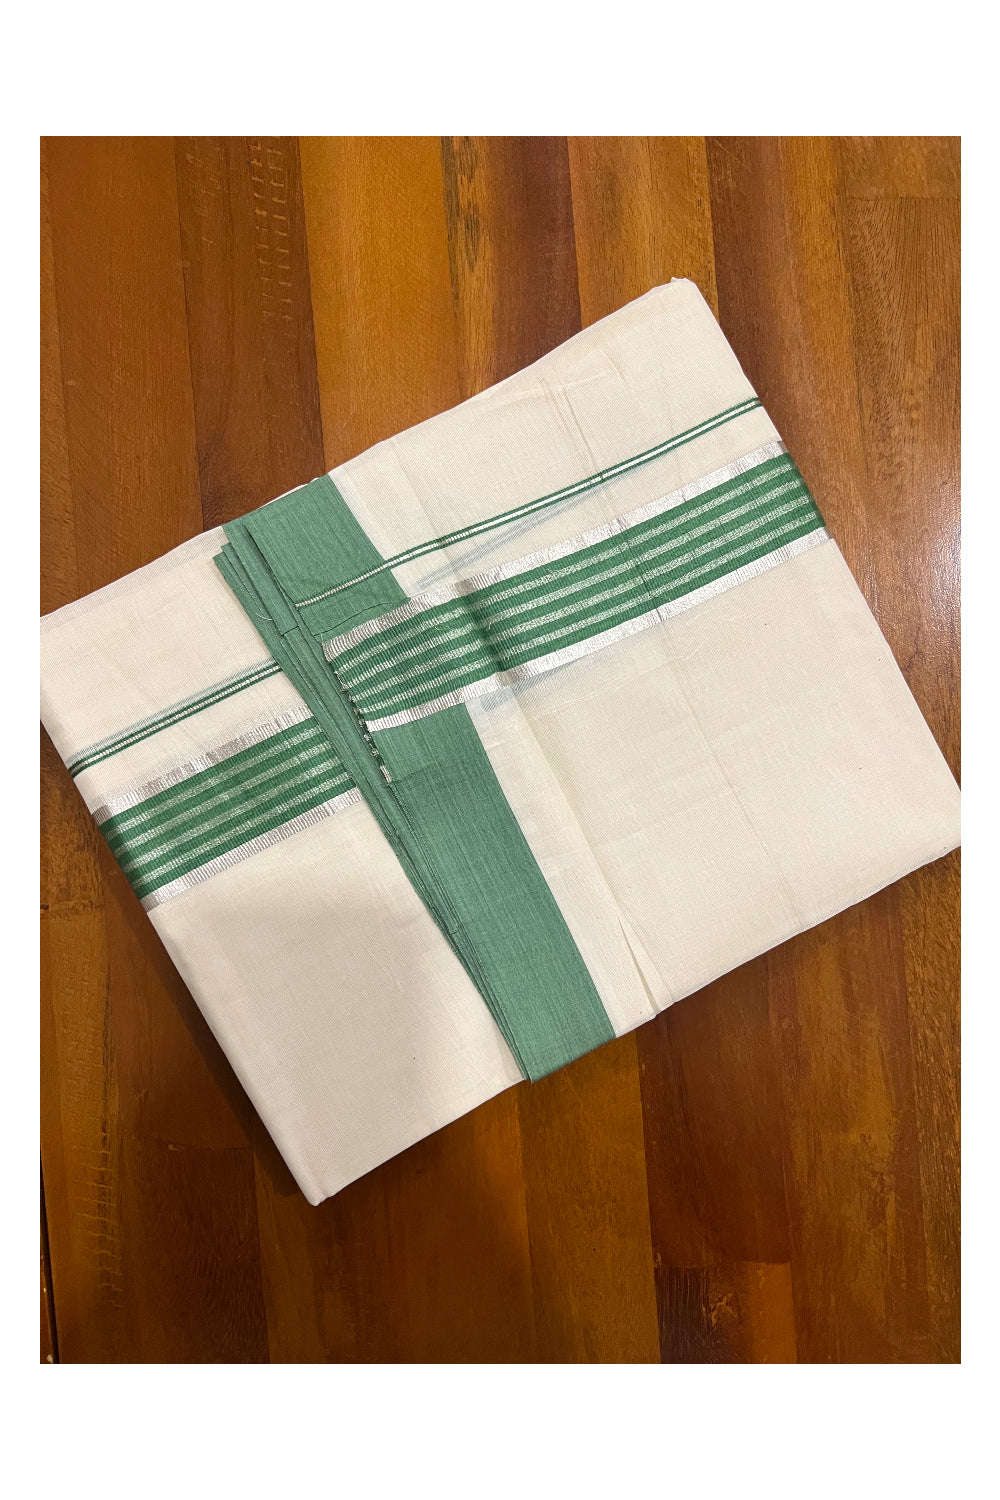 Off White Kerala Double Mundu with Green and Silver Kasavu Lines Border (South Indian Dhoti)